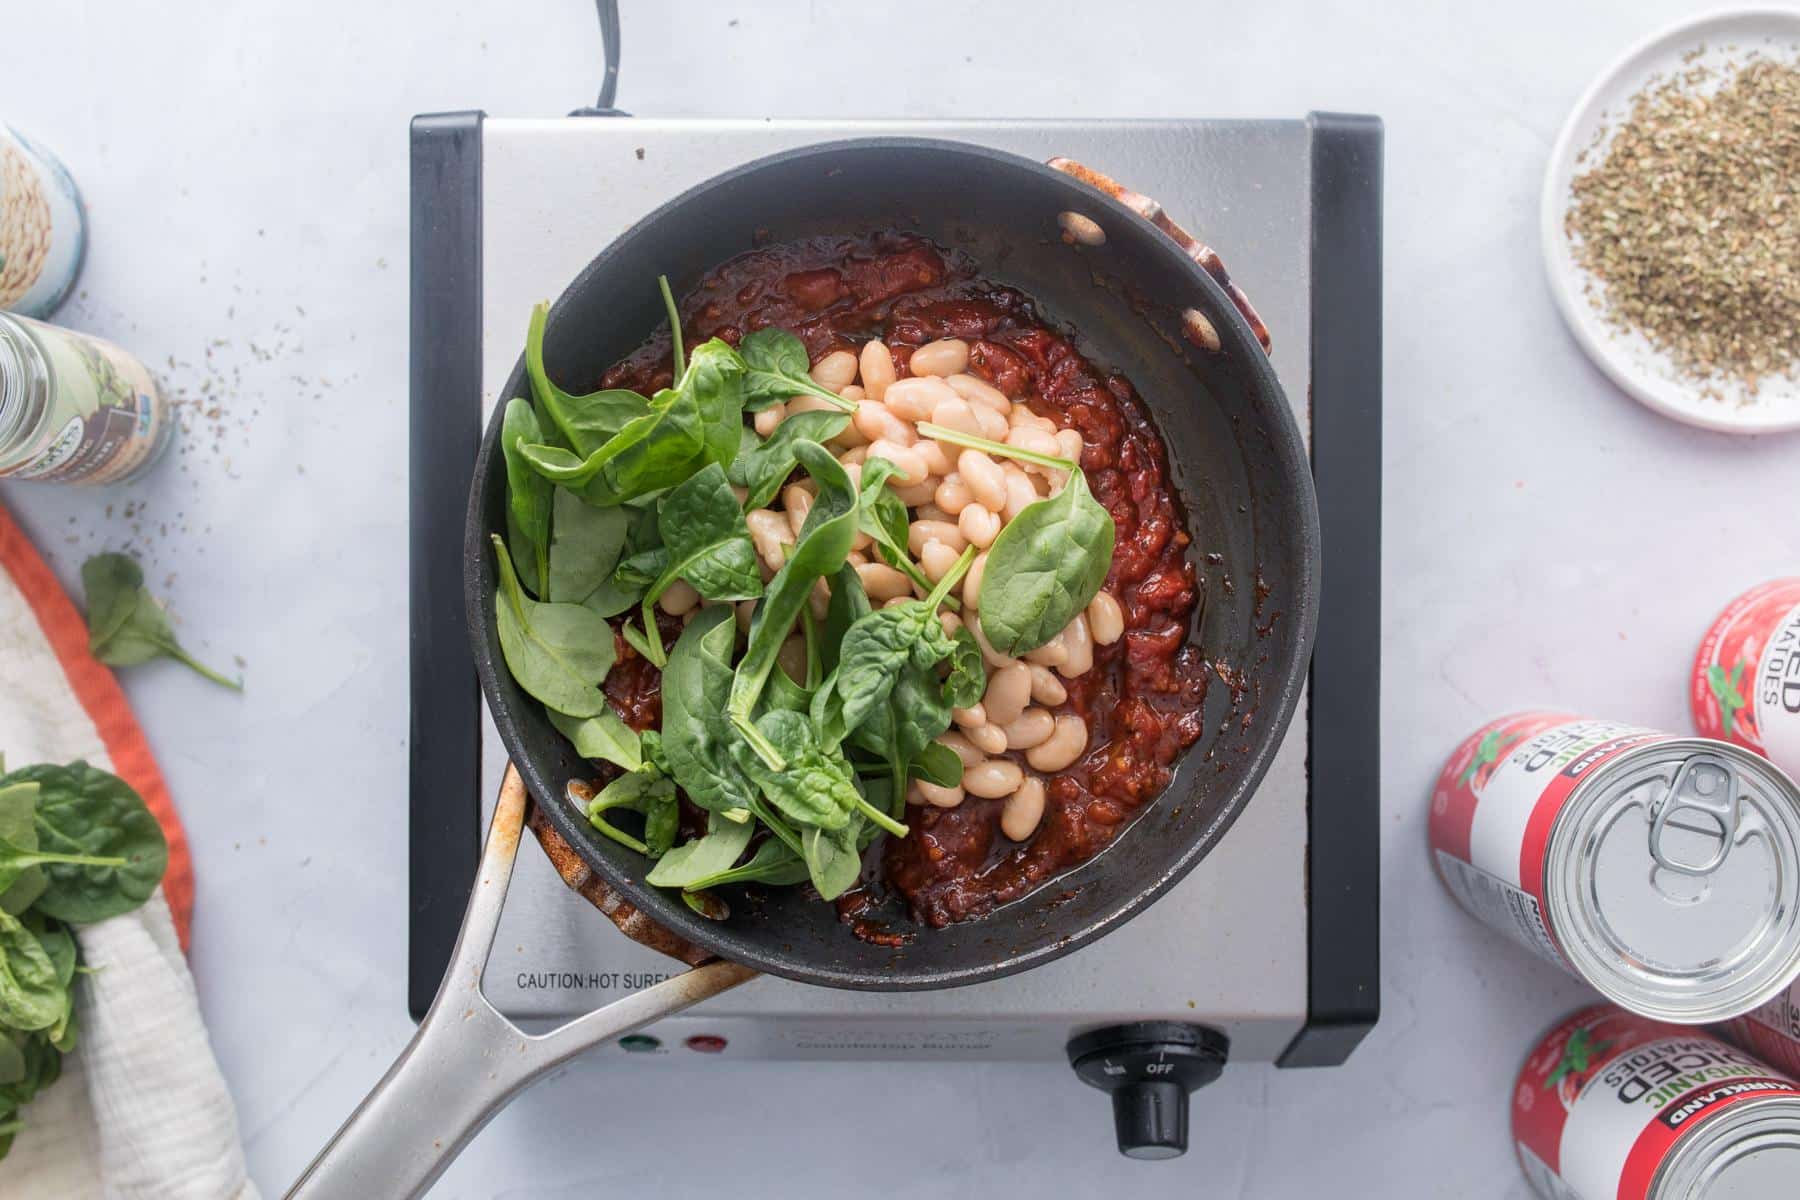 tomatoes, beans, spinach in skillet